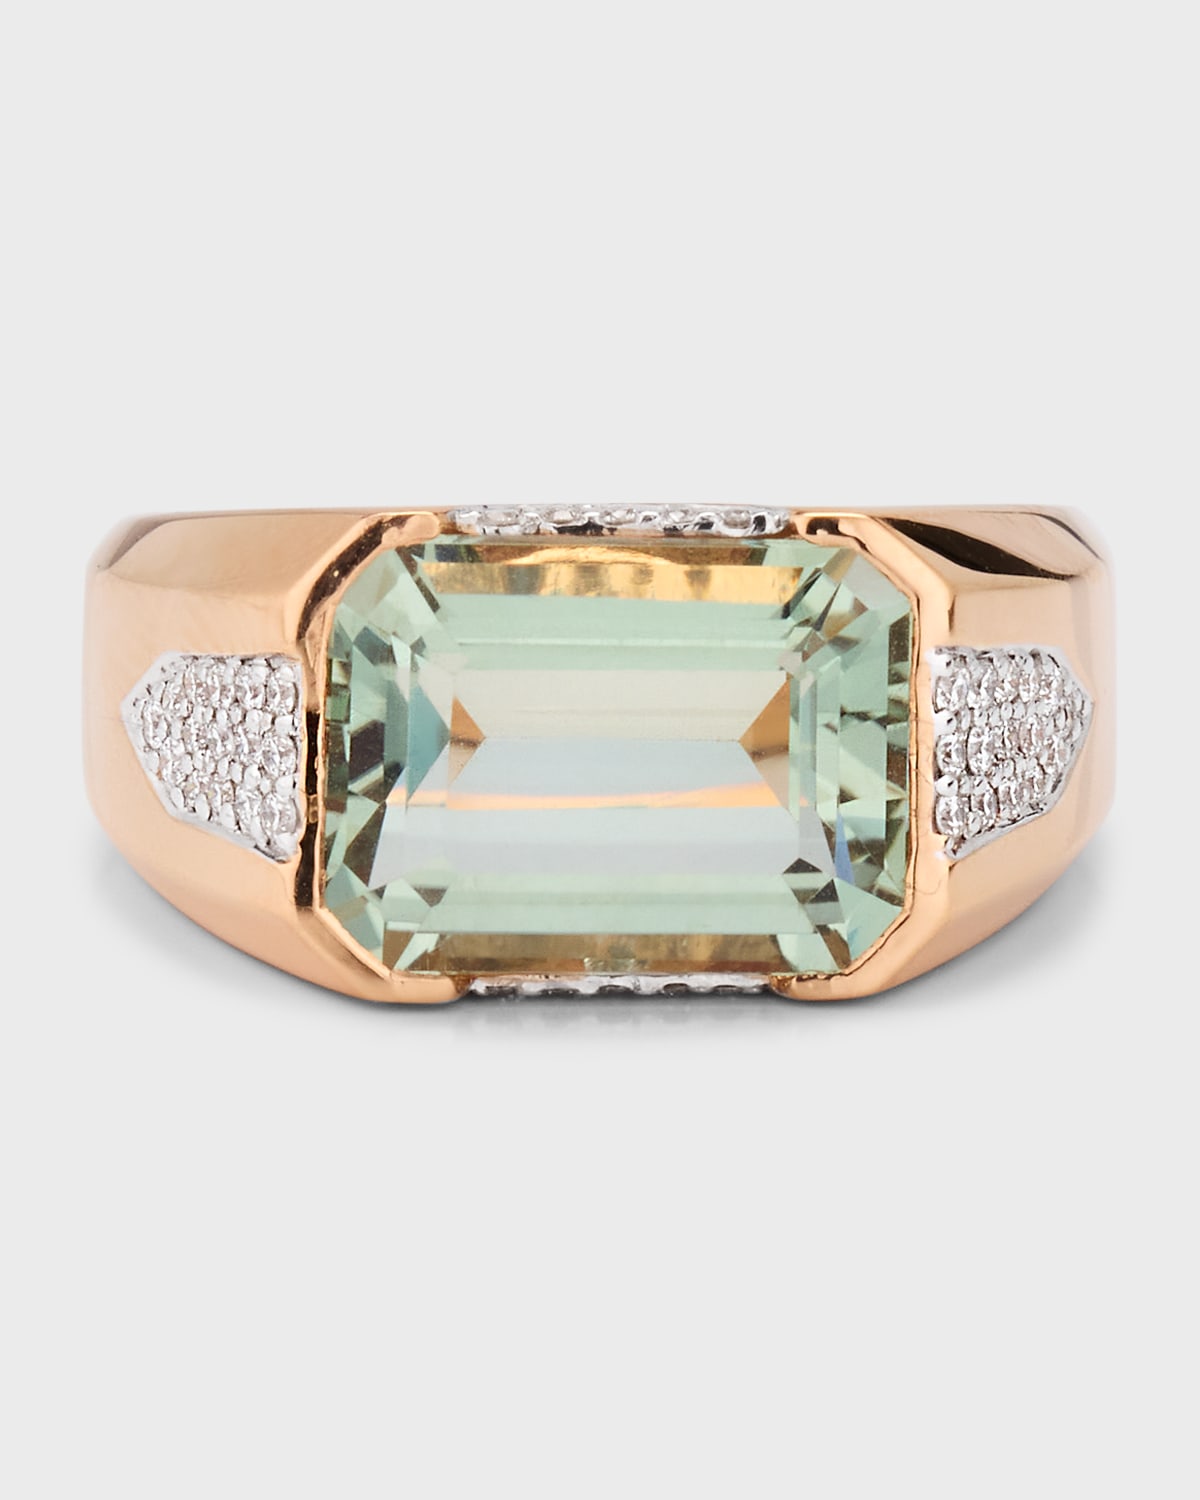 18K White and Rose Gold Emerald Cut Green Amethyst Ring with Pave Diamonds, Size 6.5